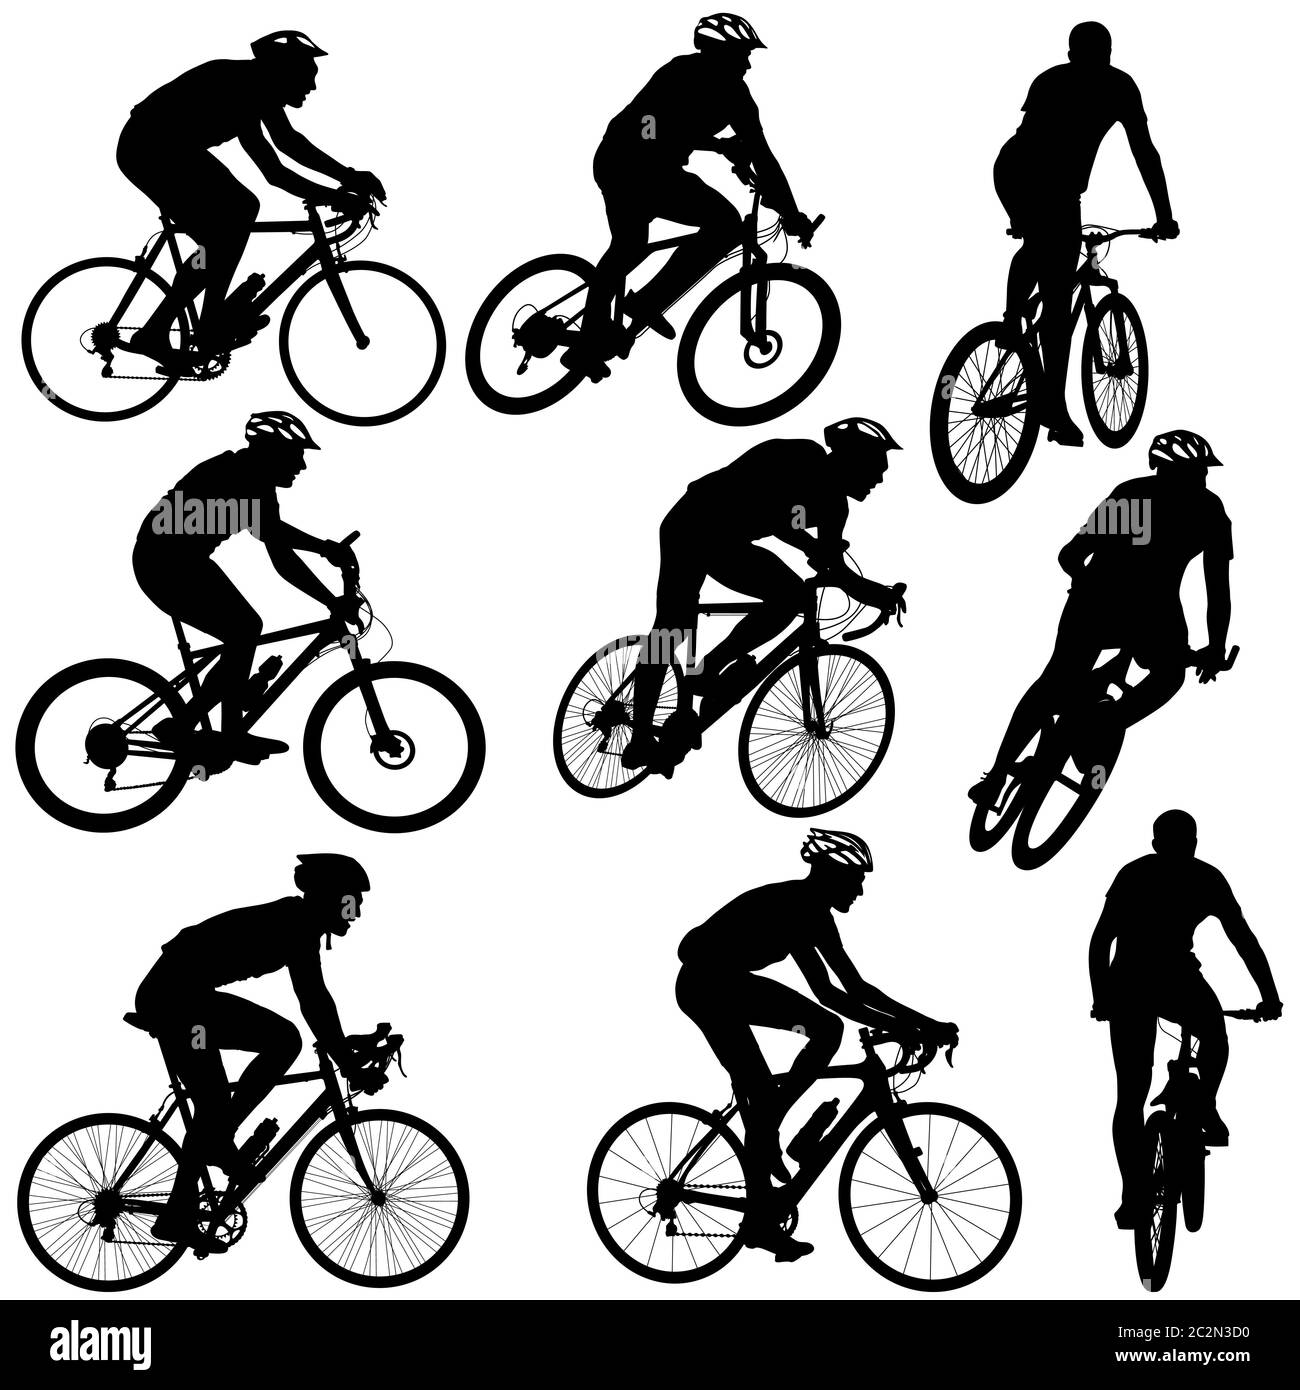 Female Road Cyclist Black and White Stock Photos & Images - Alamy